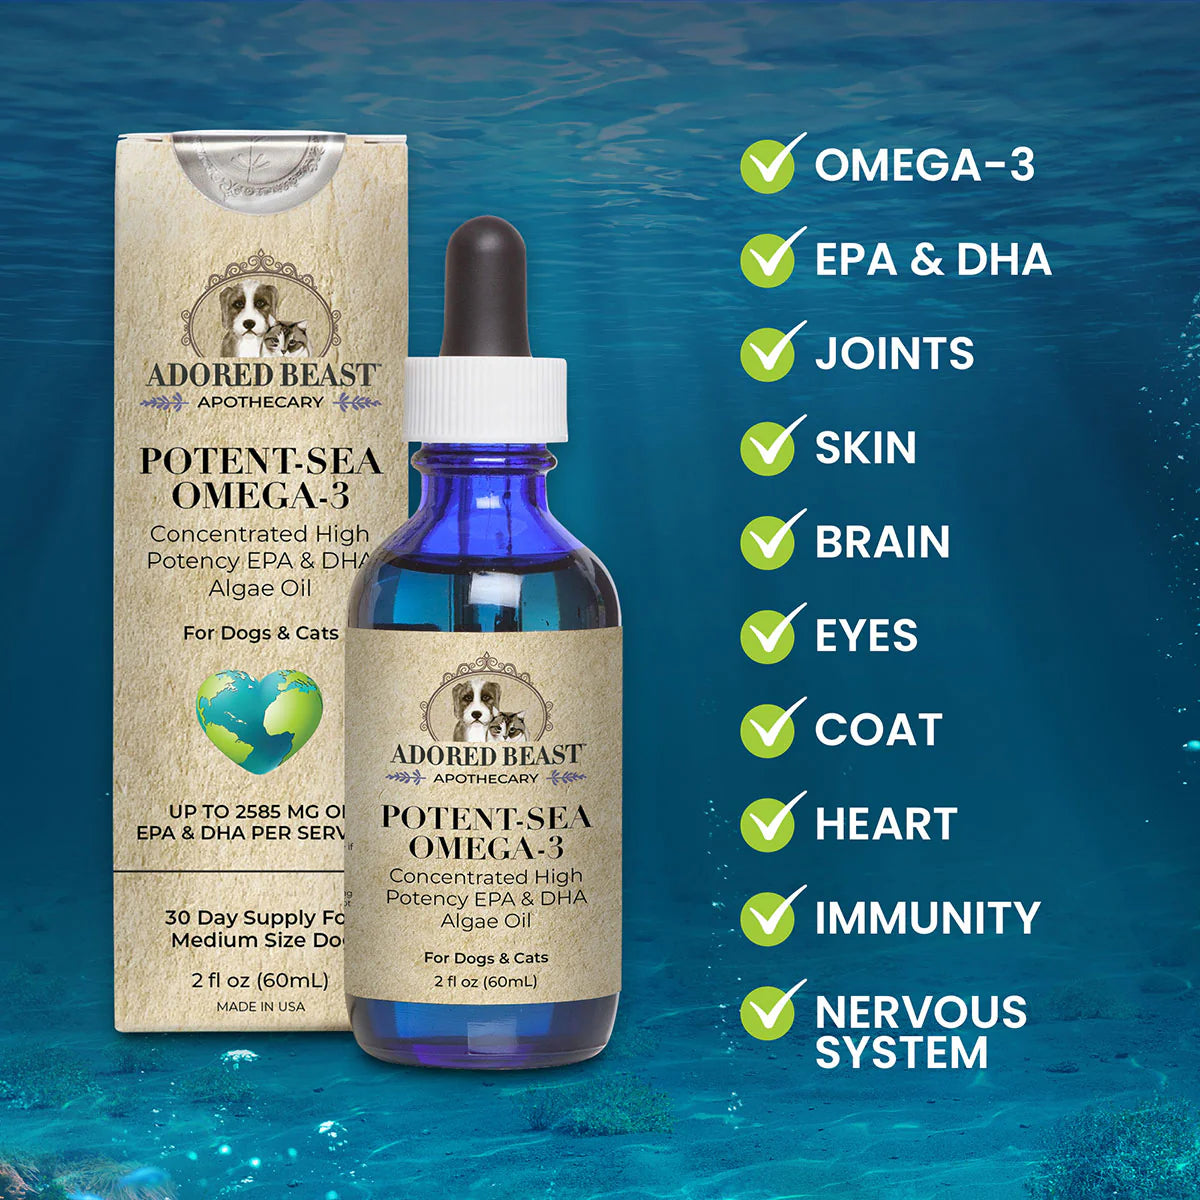 Adored Beast Potent Sea Omega 3: Image showcasing the benefits of omega-3 fatty acids for pet health and wellness.